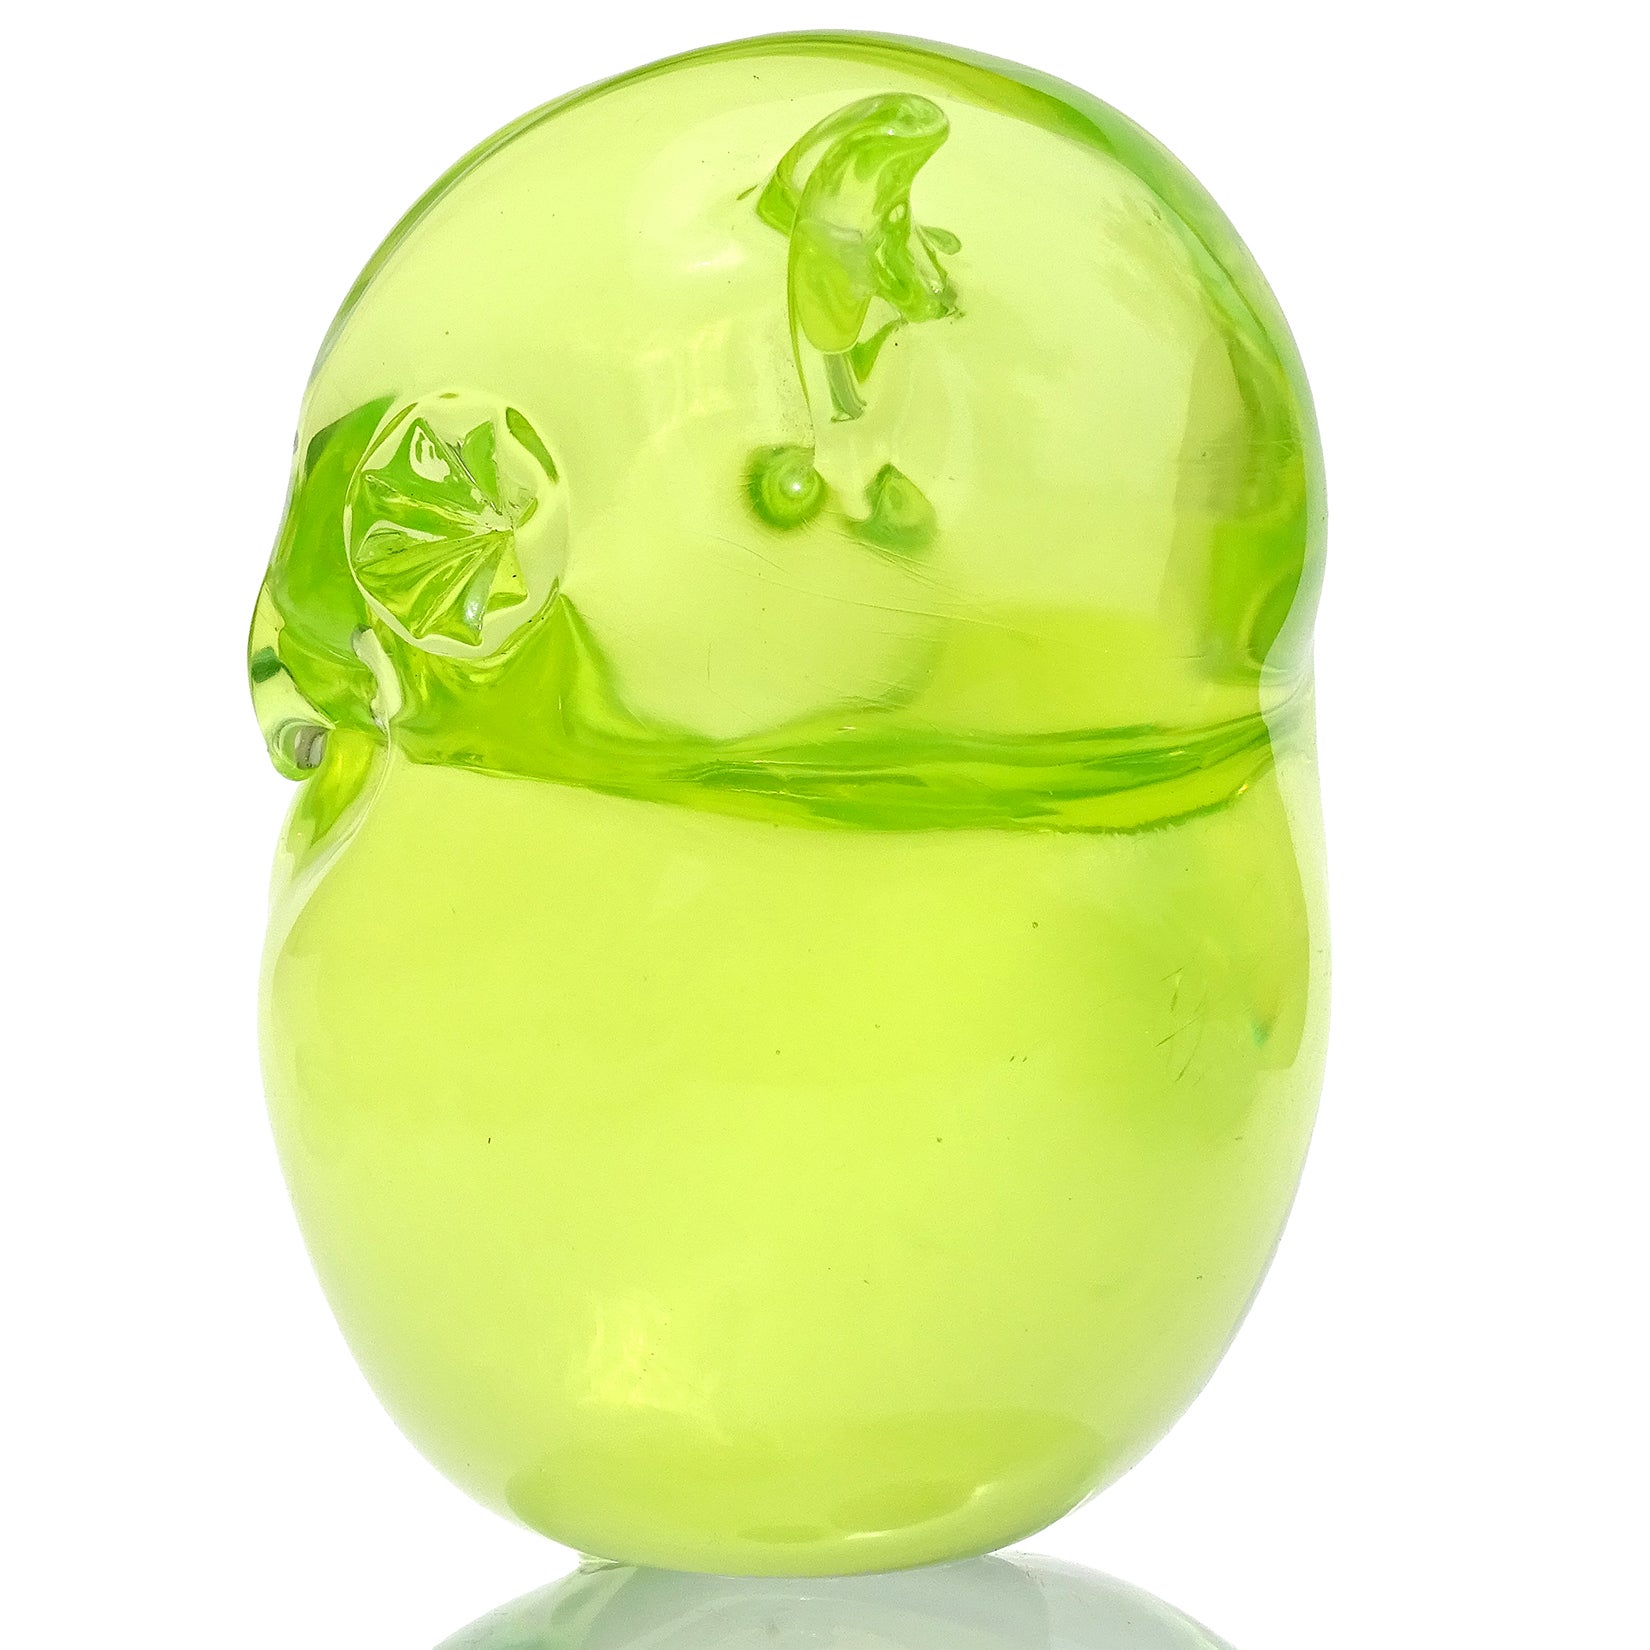 Hand-Crafted Murano Sommerso Glowing Uranium Green Italian Art Glass Owl Bird Sculpture For Sale